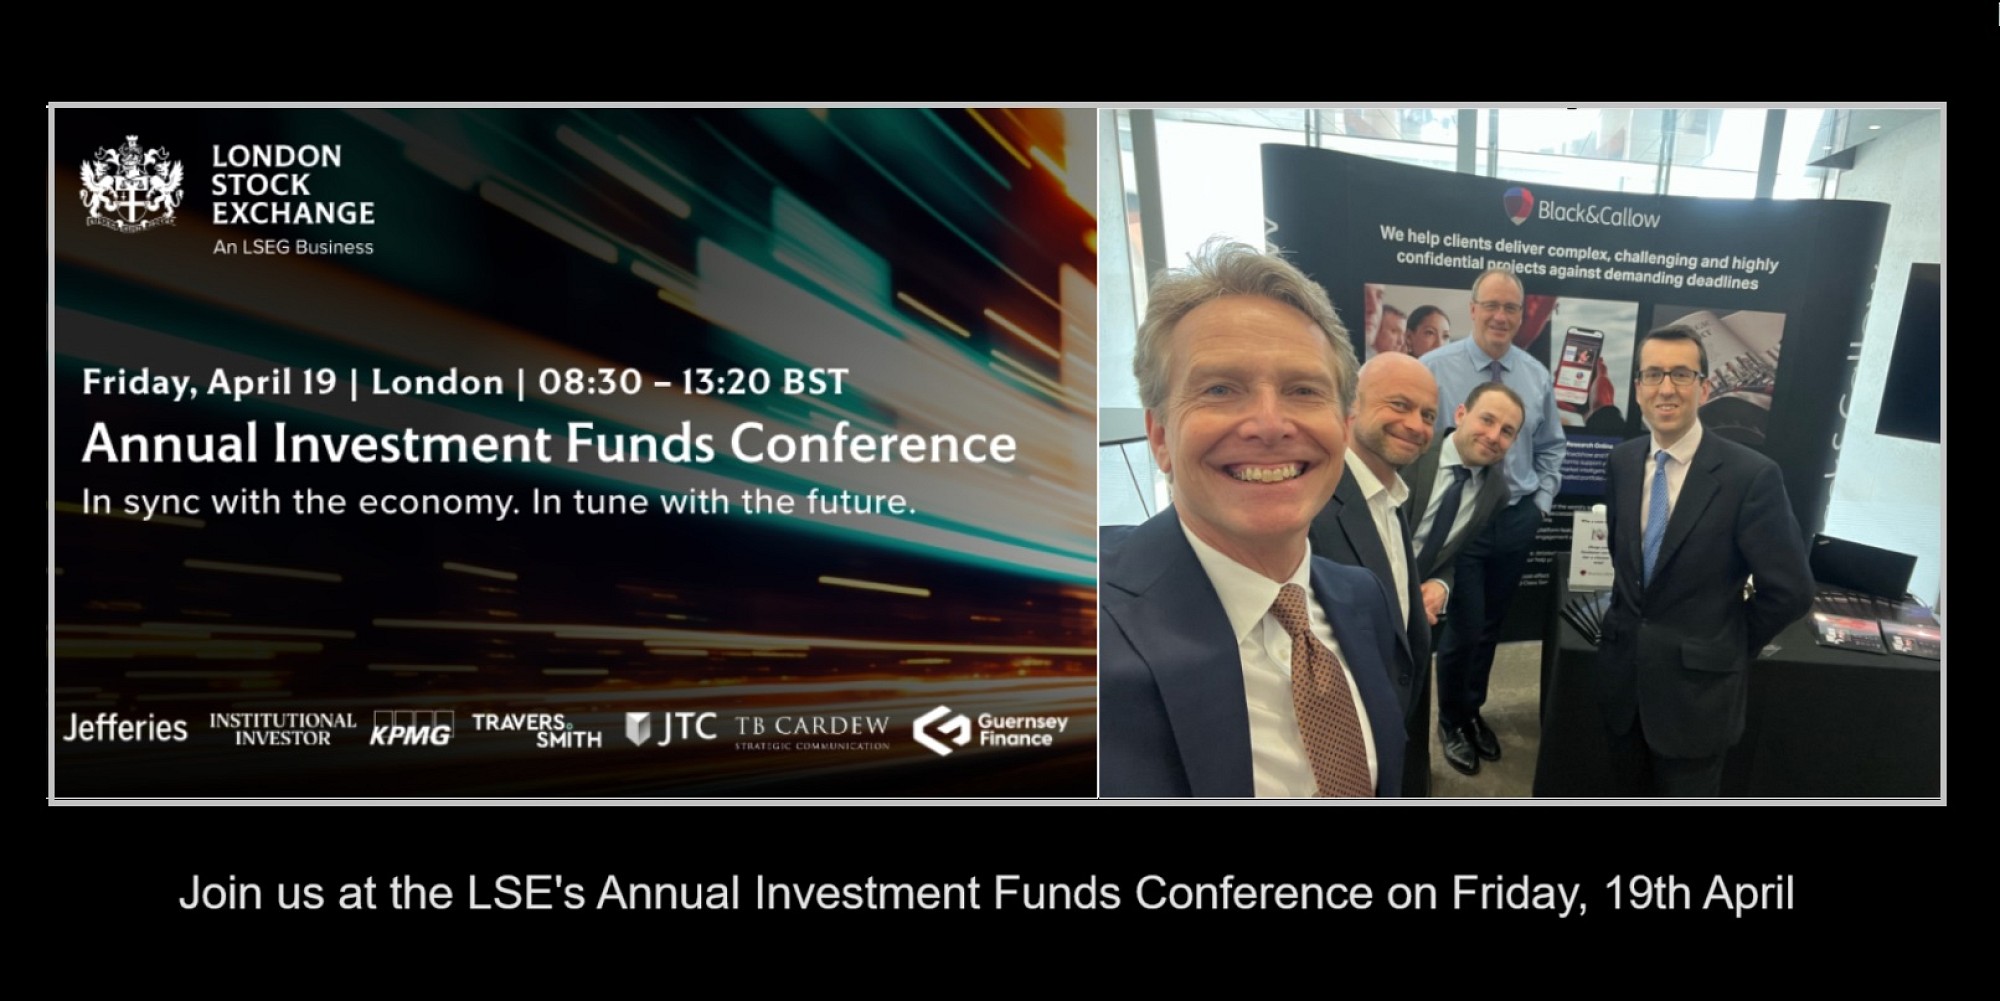 Join us at the LSE's Annual Investment Funds Conference on 19th April